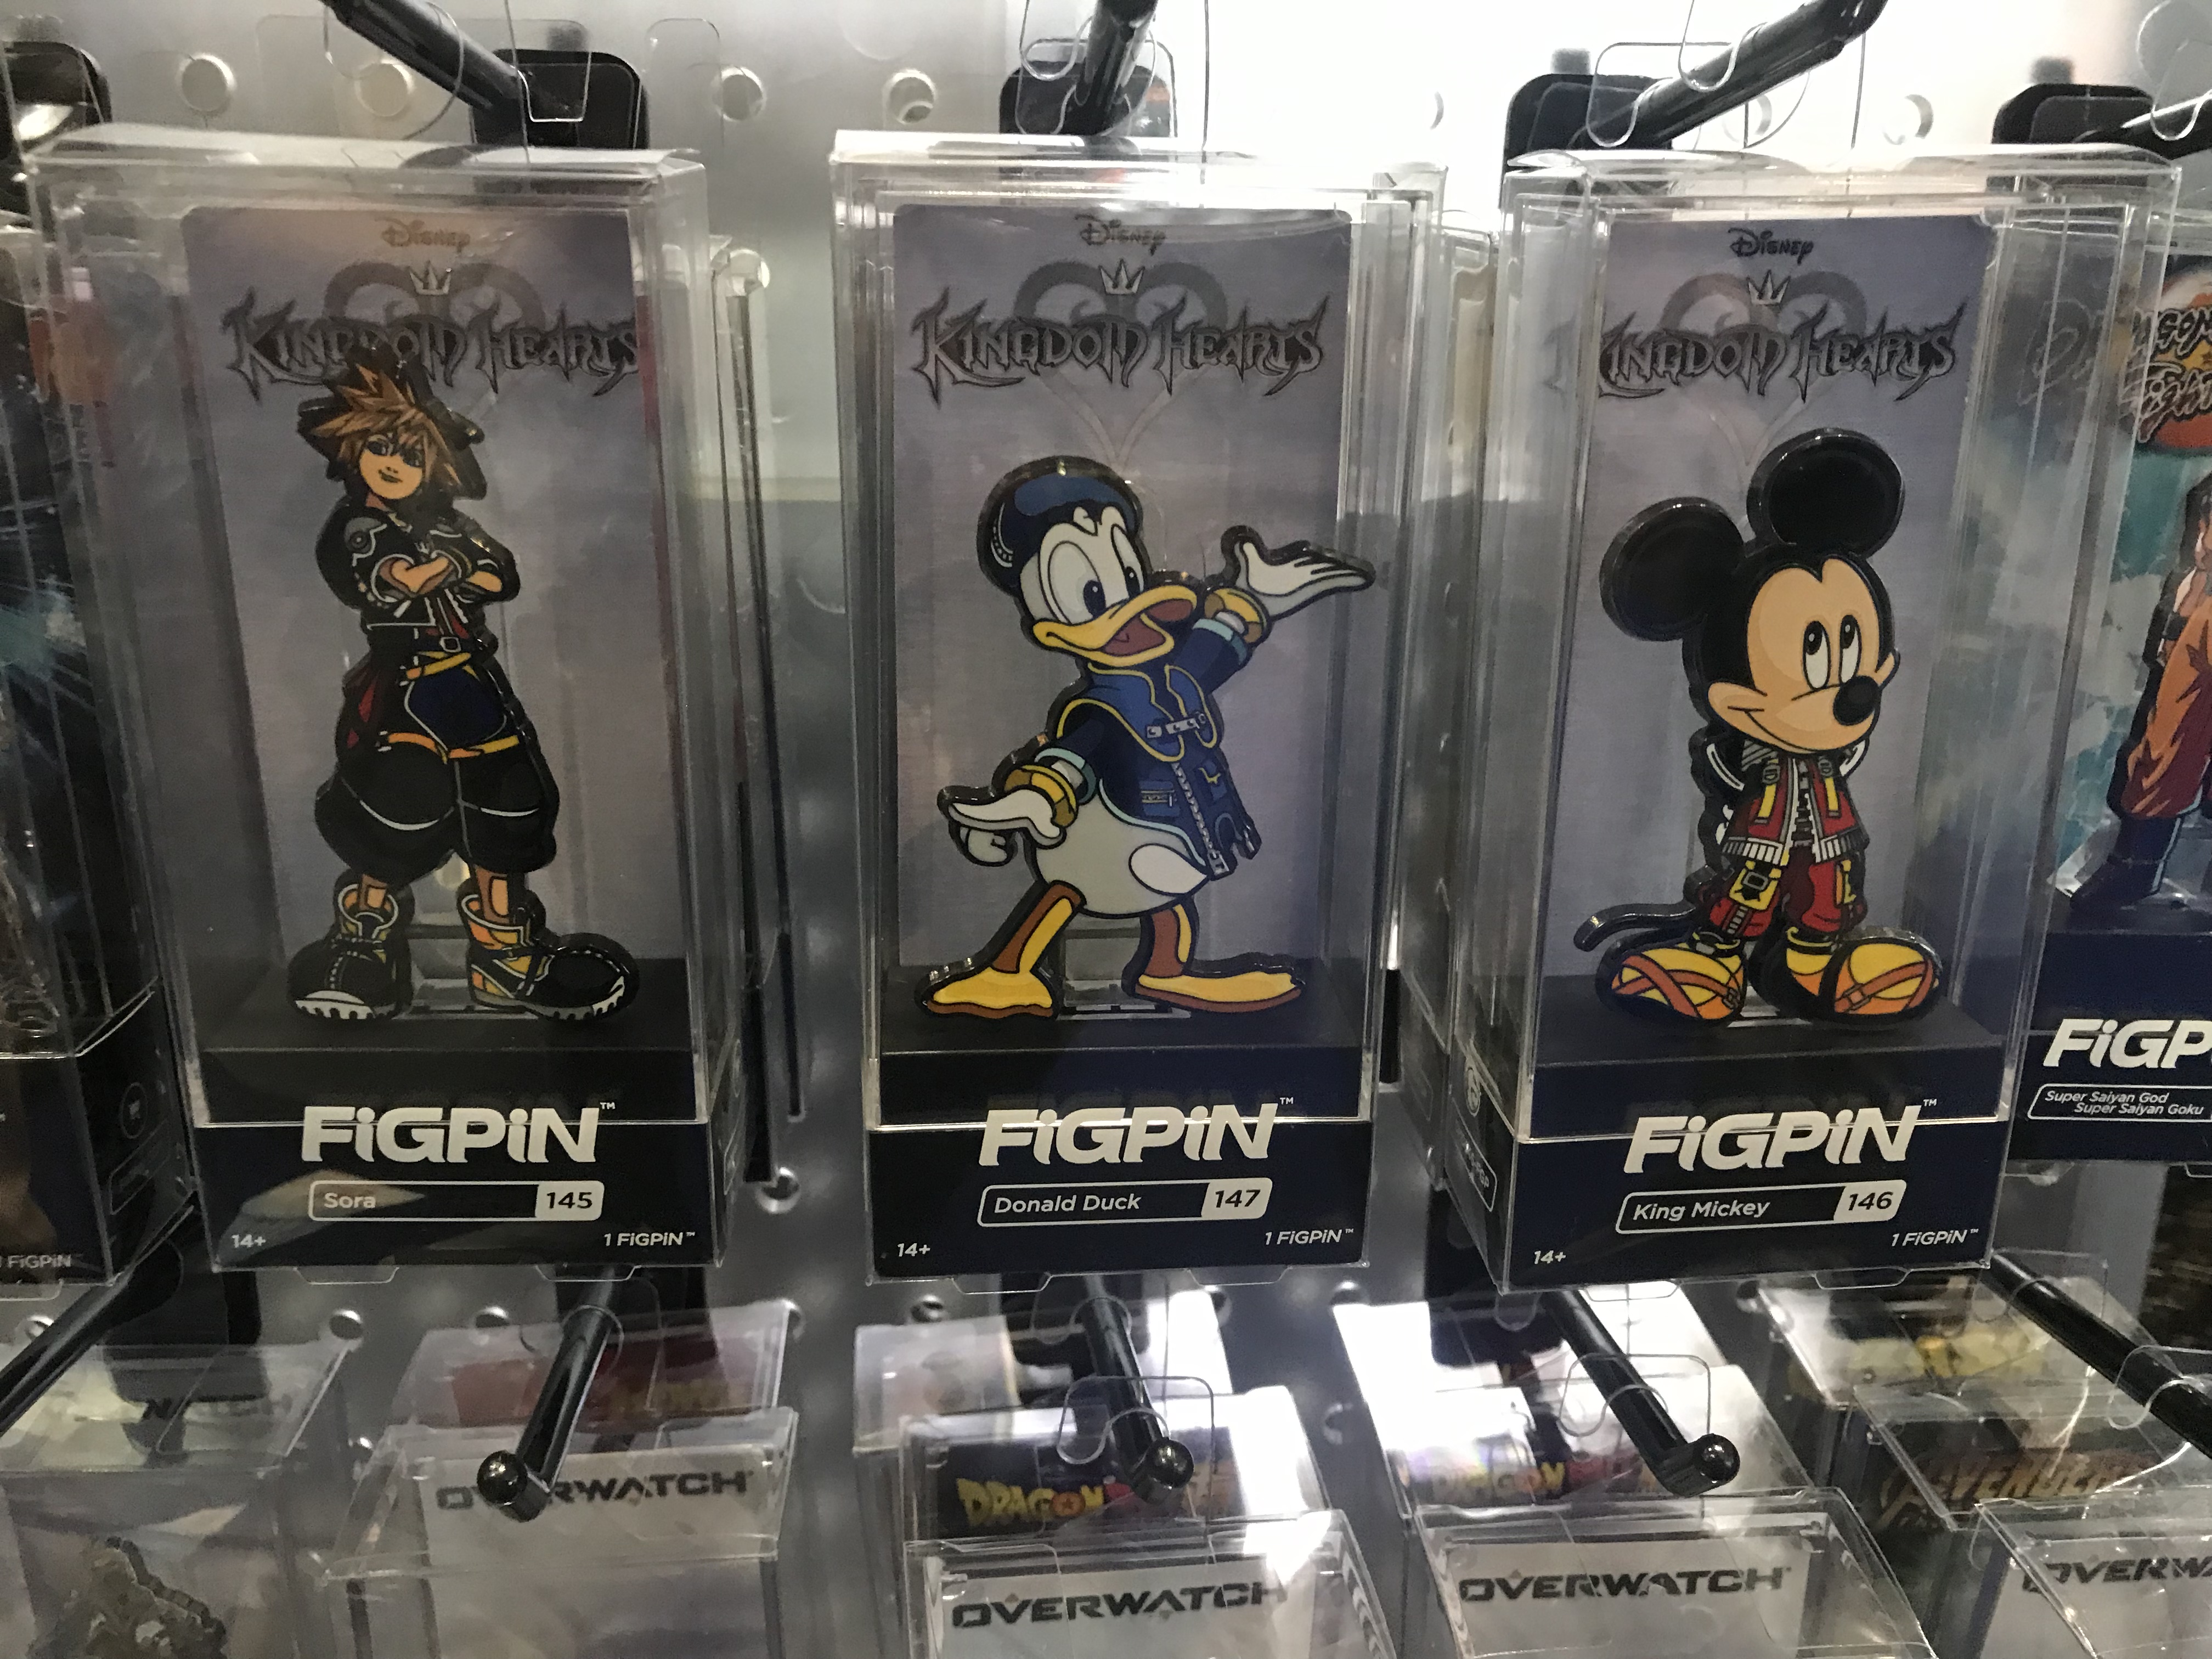 Pin Collectors Will Love These New Pins From FigPin